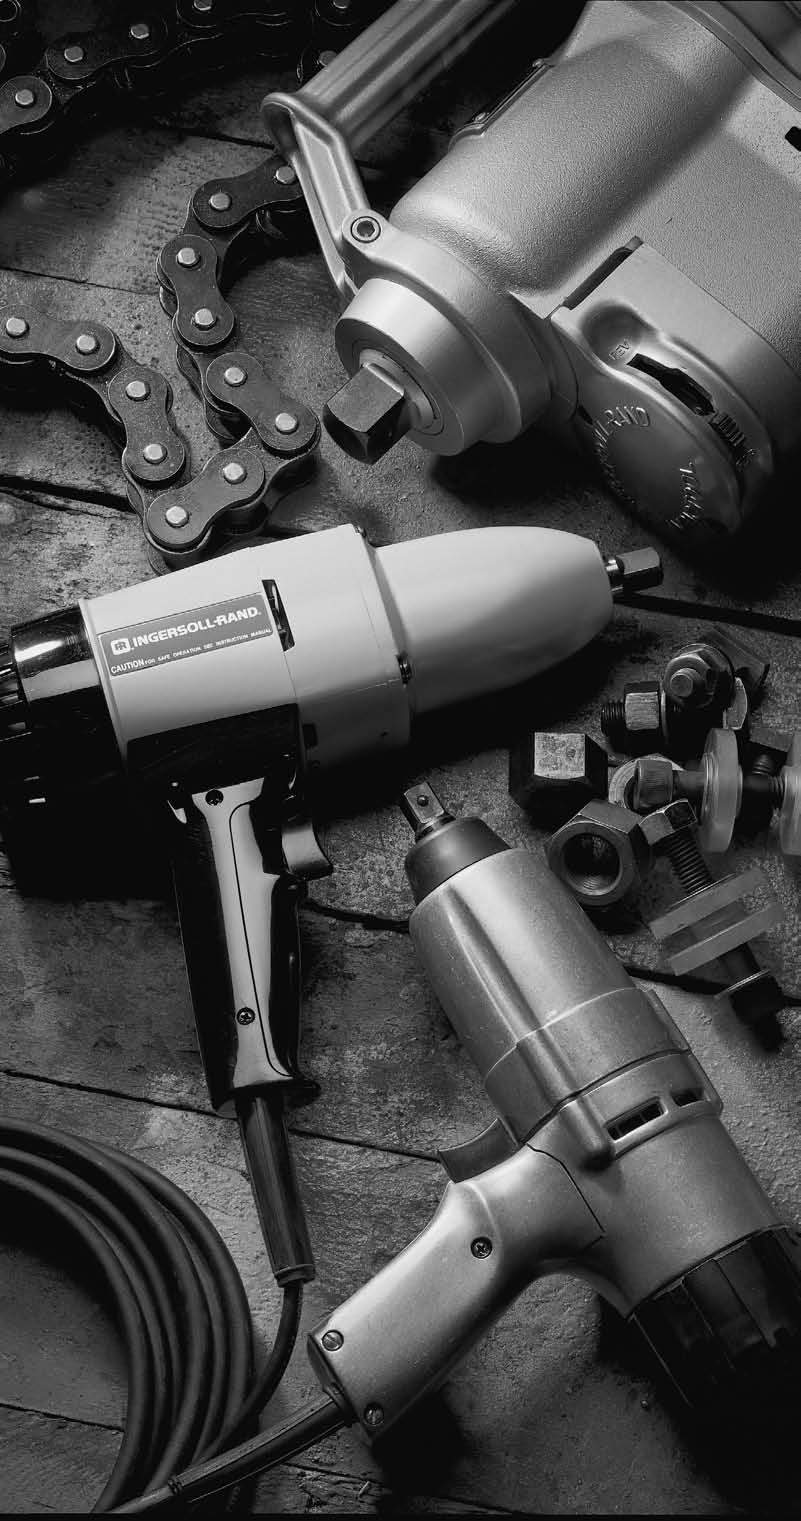 Electric Impact Tools For applications where the use of compressed air is not practical, IR offers a complete line of electric Impact Tools in 3 8, 1 2, 3 4 and 1- inch drive sizes.